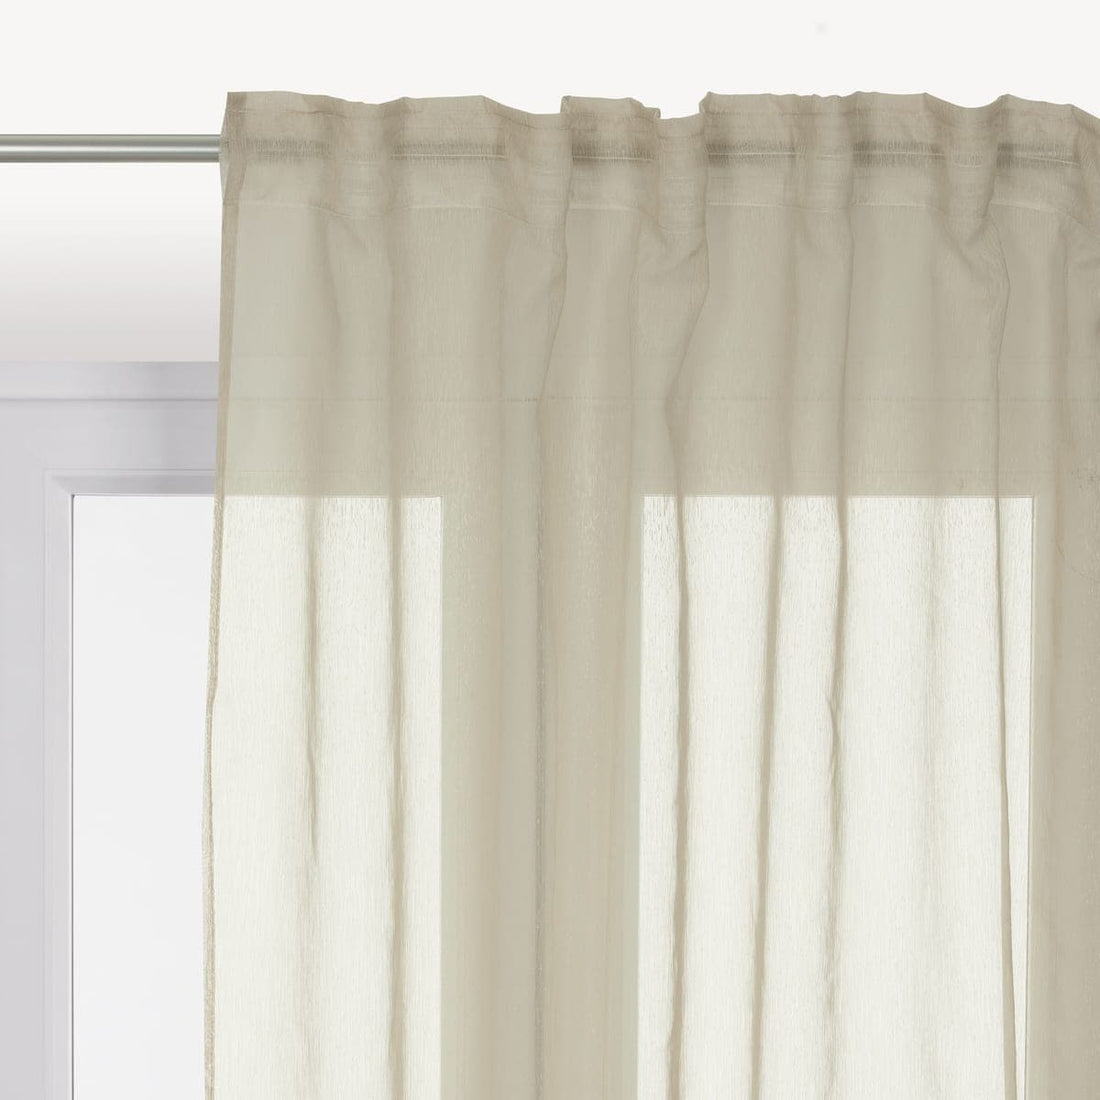 BEIGE SOFTY FILTER CURTAIN 200X280 CM WITH CONCEALED LOOP AND WEBBING - best price from Maltashopper.com BR480009477